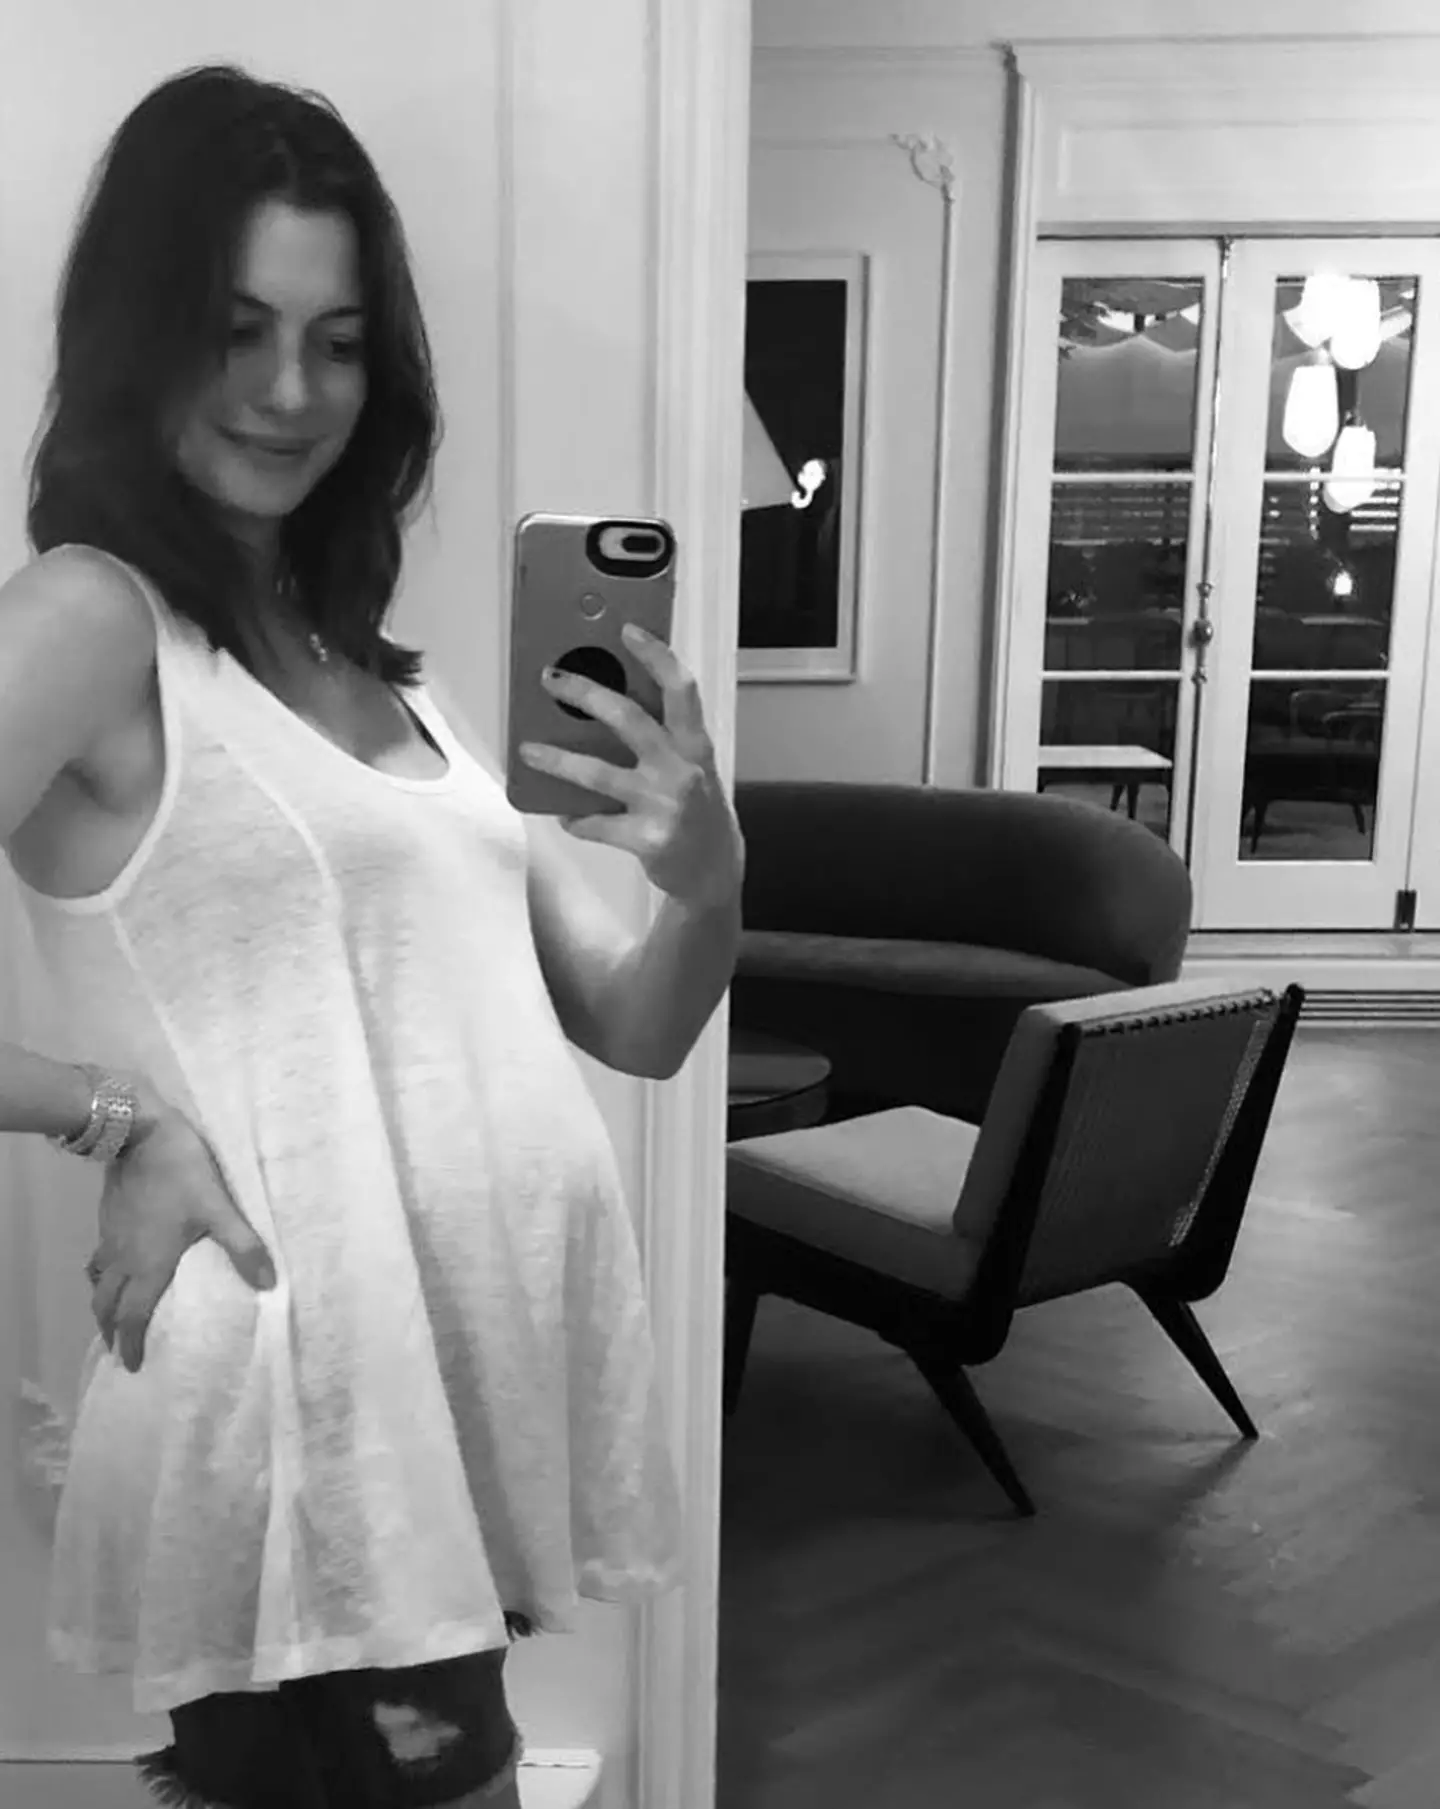 The Les Misérables star took to Instagram back in 2019 to open up about her fertility journey.